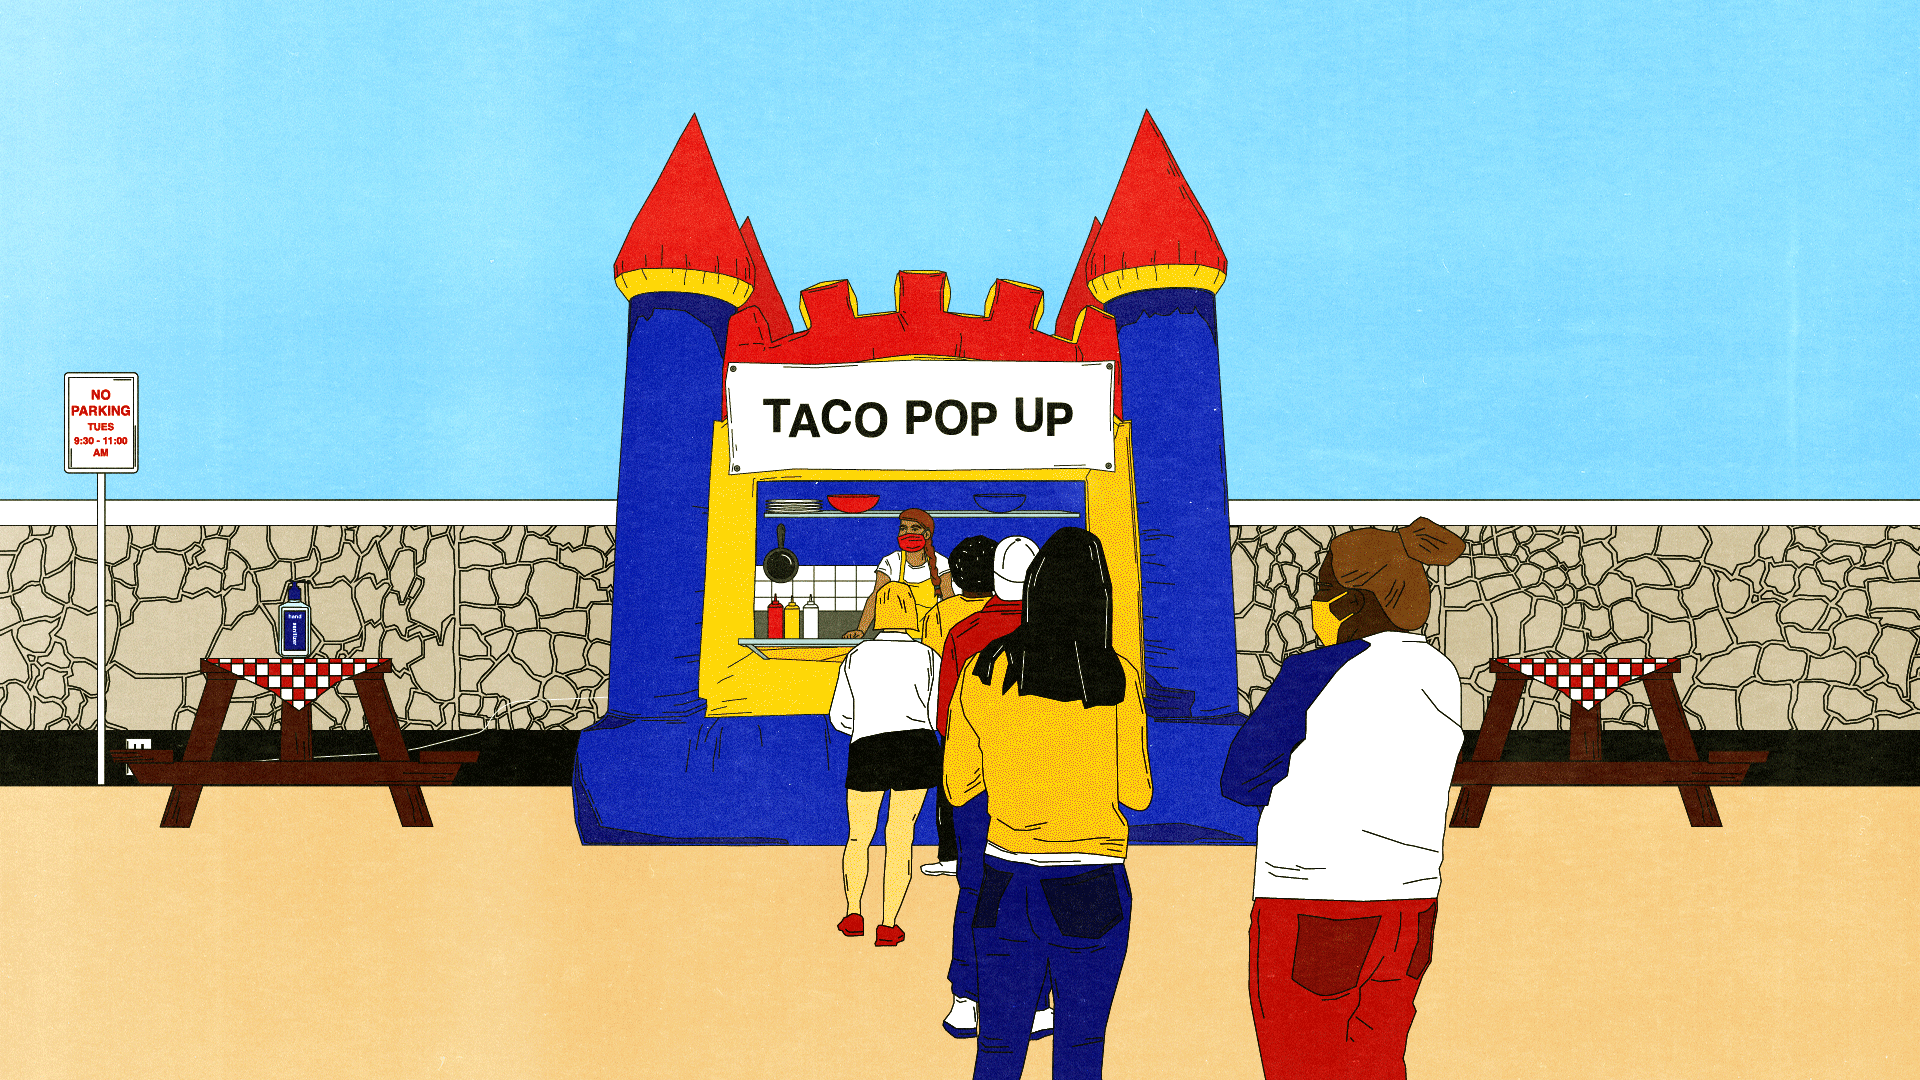 Moving image of a line of people in front of a bounce house with sign saying “taco pop-up,” the people gradually disappear and the bounce house deflates. 